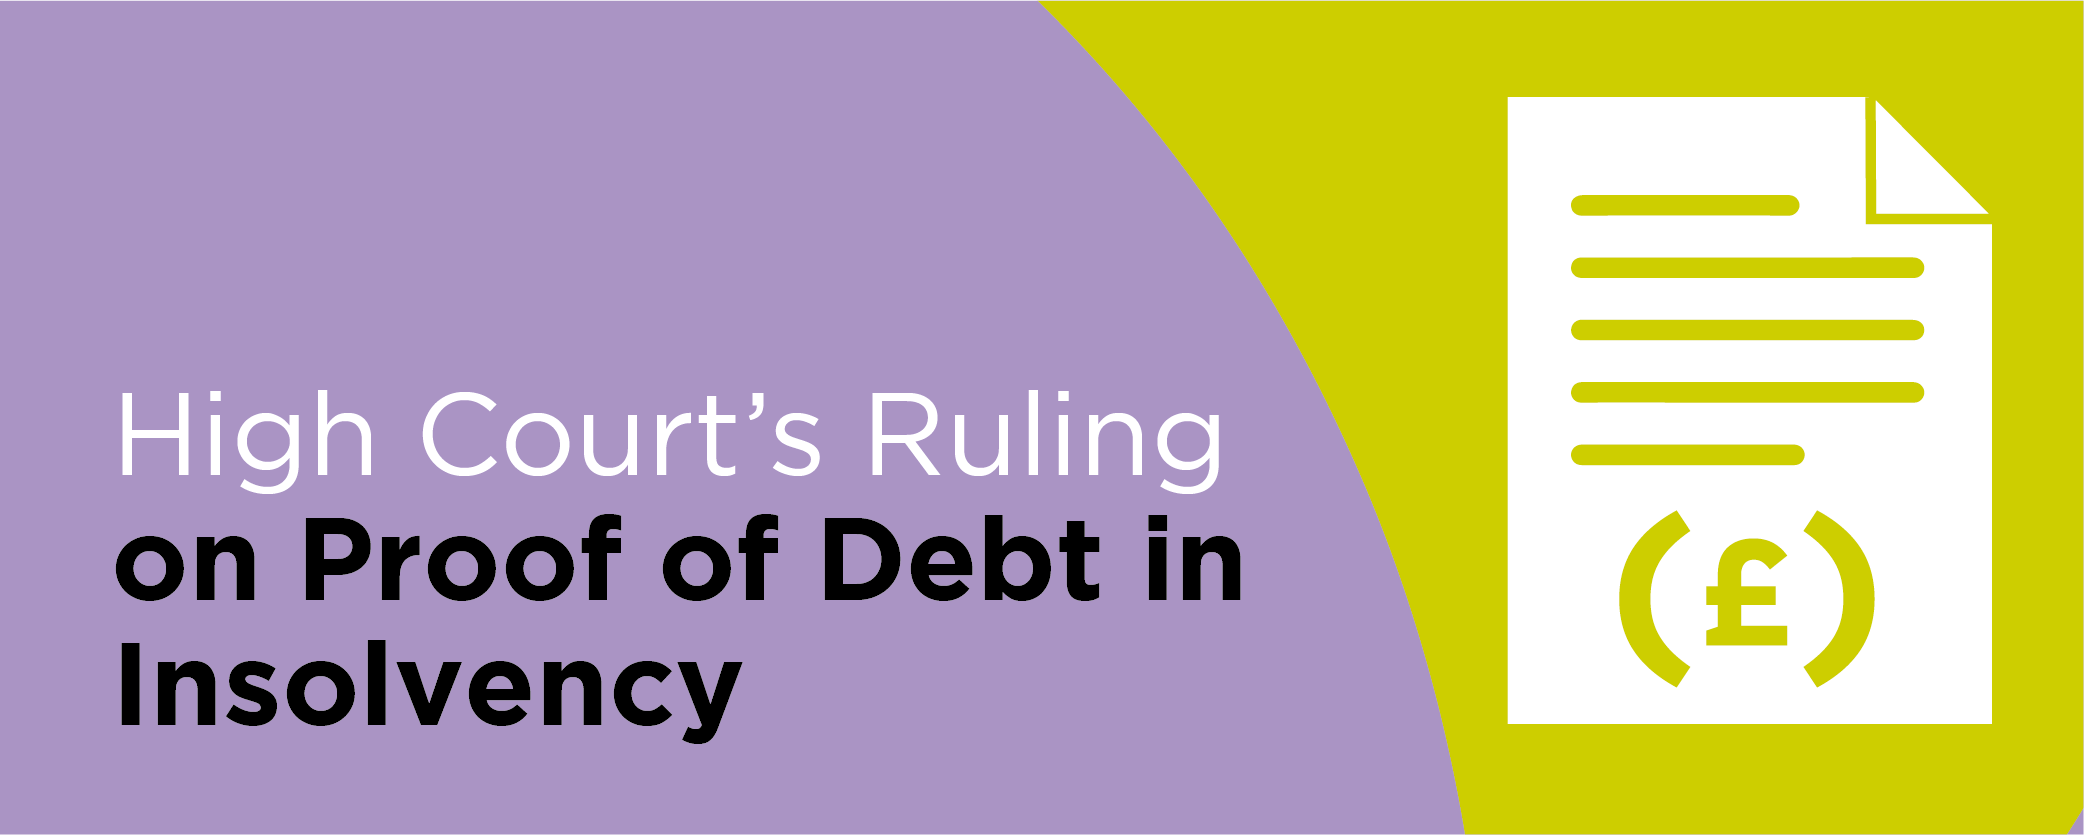 High Courts Ruling on Proof of Debt in Insolvency